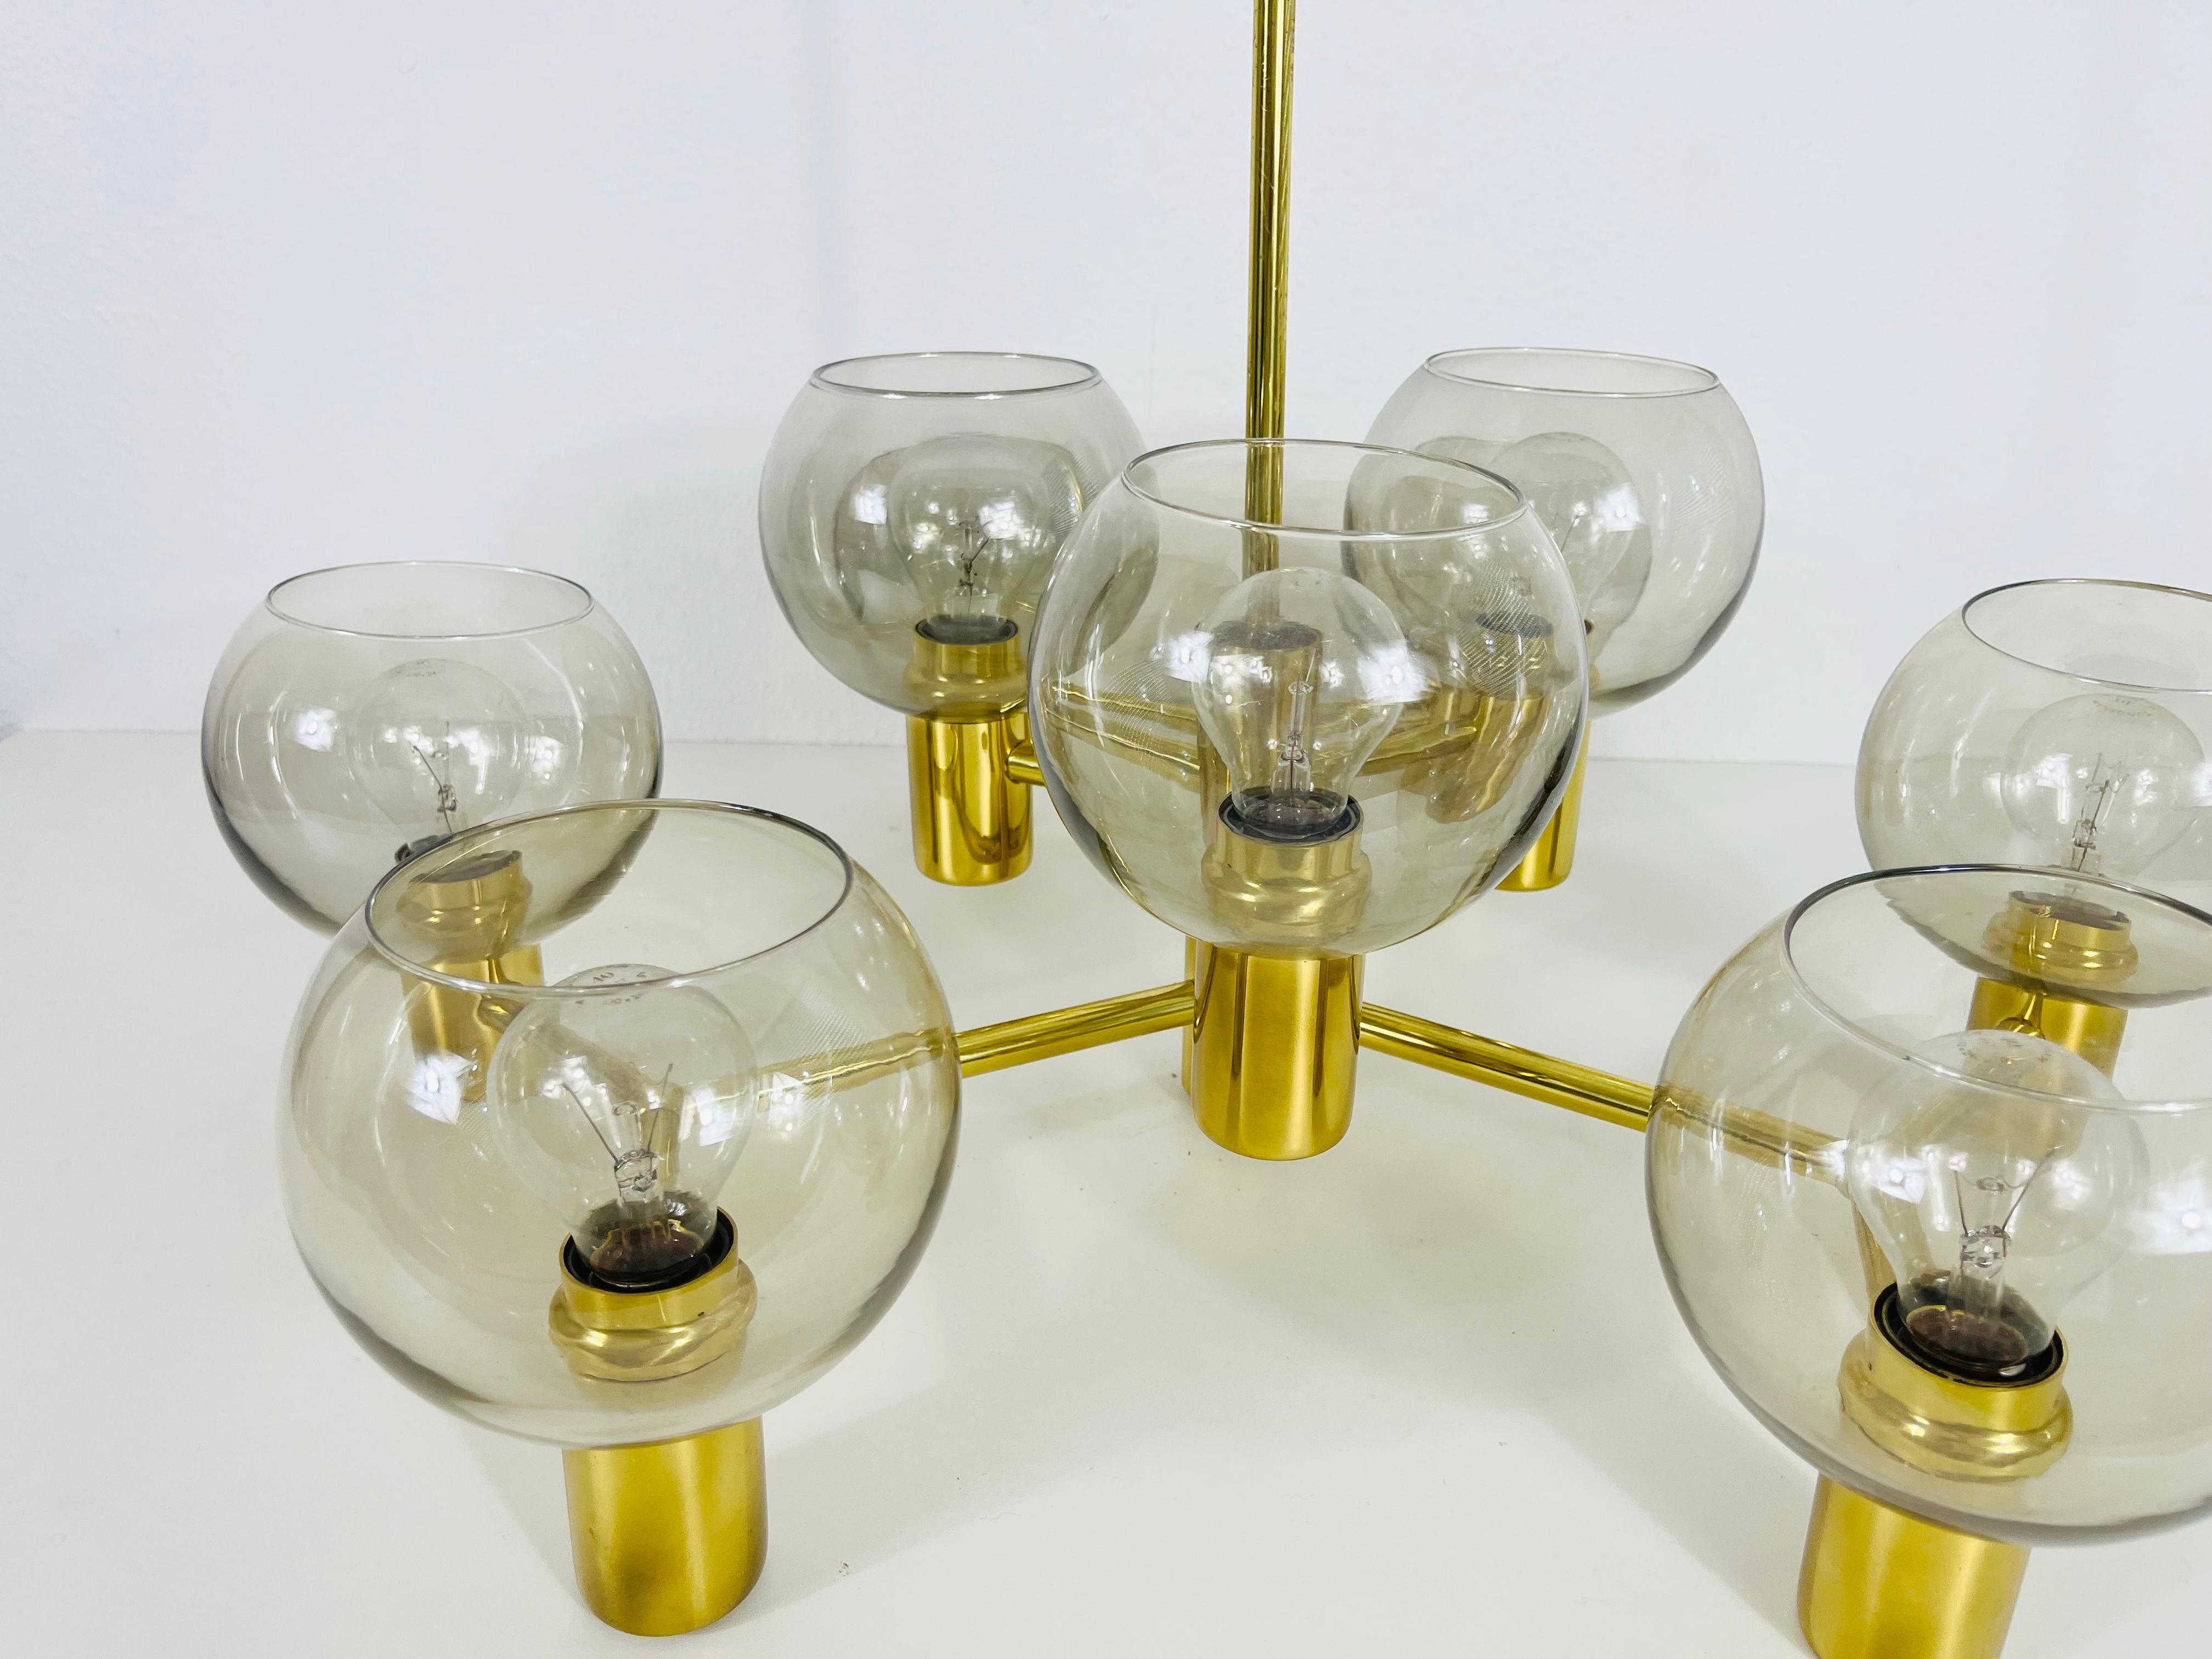 Monumental Swedish Mid-Century Modern Brass and Glass Chandelier, 1960s For Sale 1